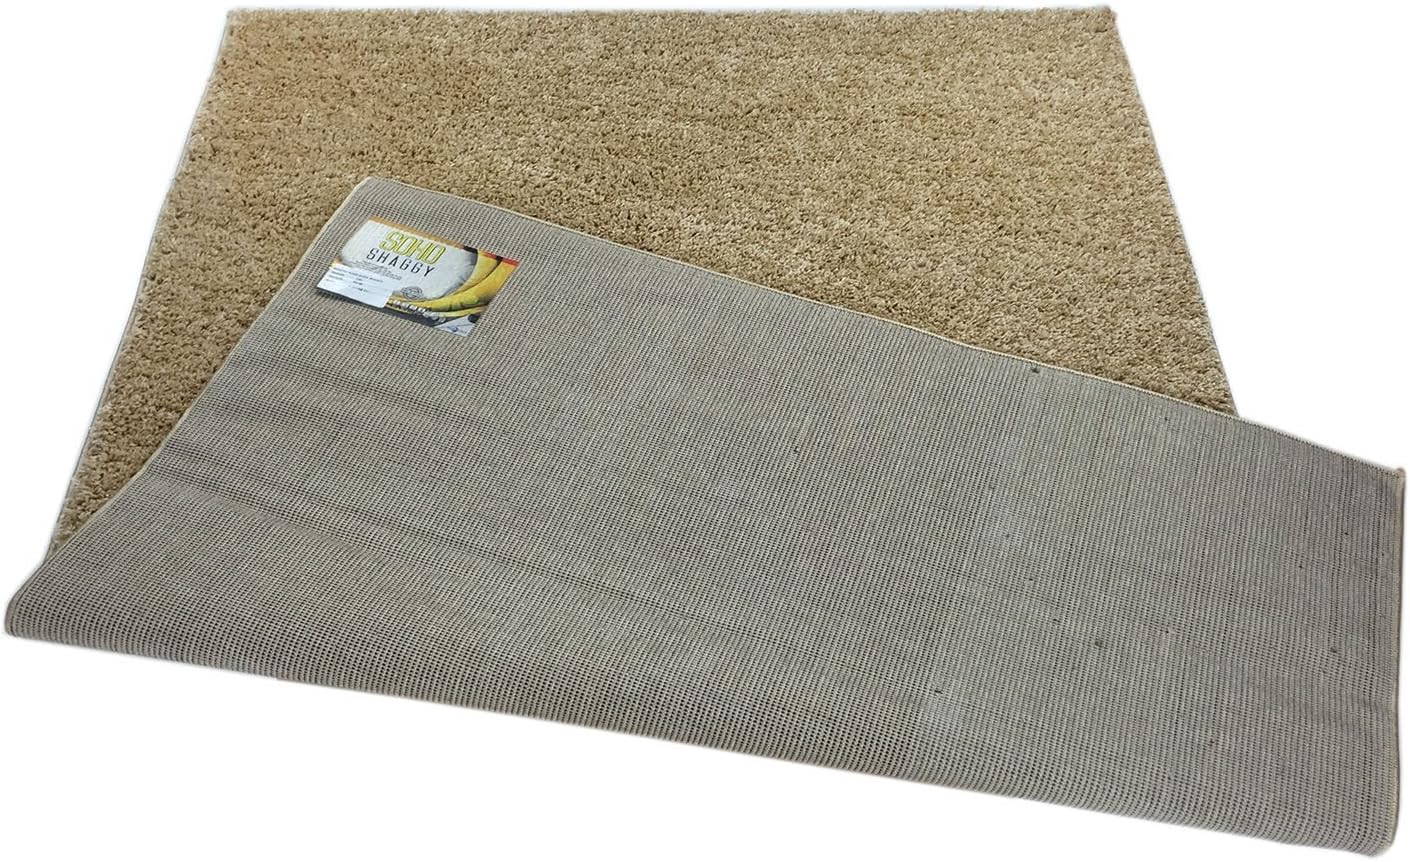 SOHO Shaggy Collection Solid Color Shag Area Rug (Beige, 5 x 7)